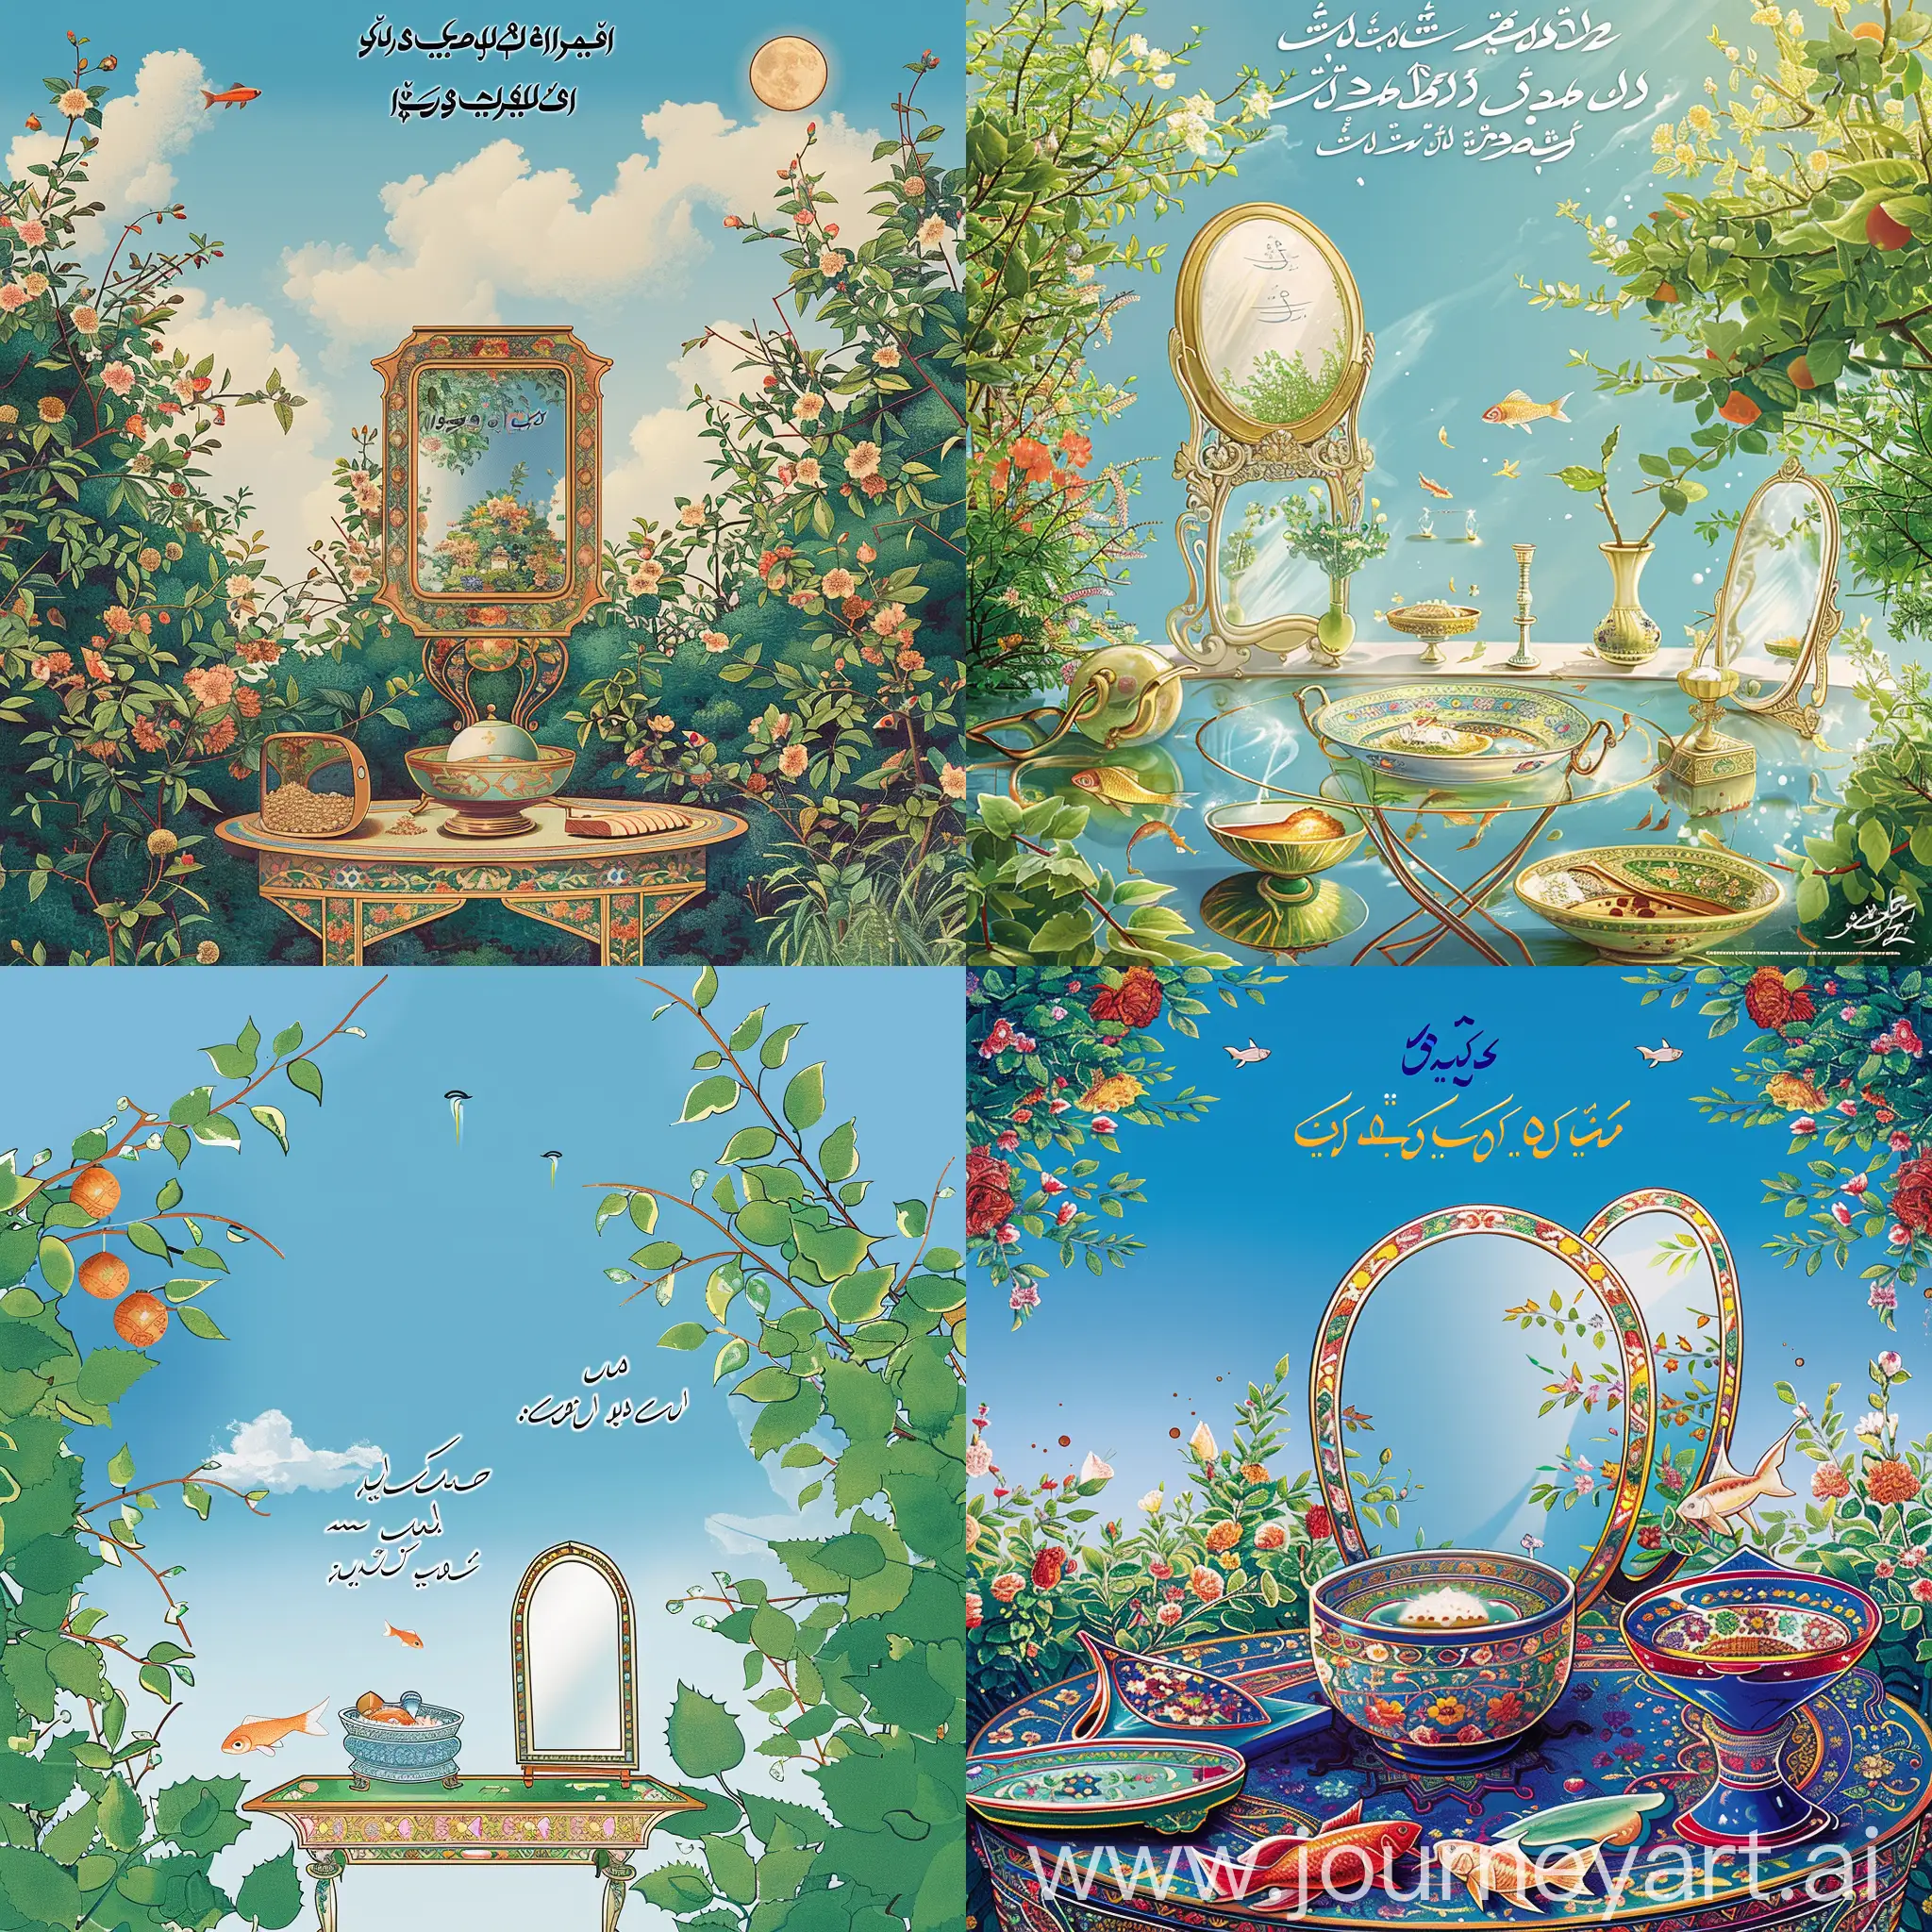 Create a picture that includes a New Year’s prayer at the top and New Year’s greetings in both Persian Nastaliq script and English, set in a spring setting with greenery, blue sky, and an Iranian Haft-Seen table with a mirror and a fish in a bowl.
